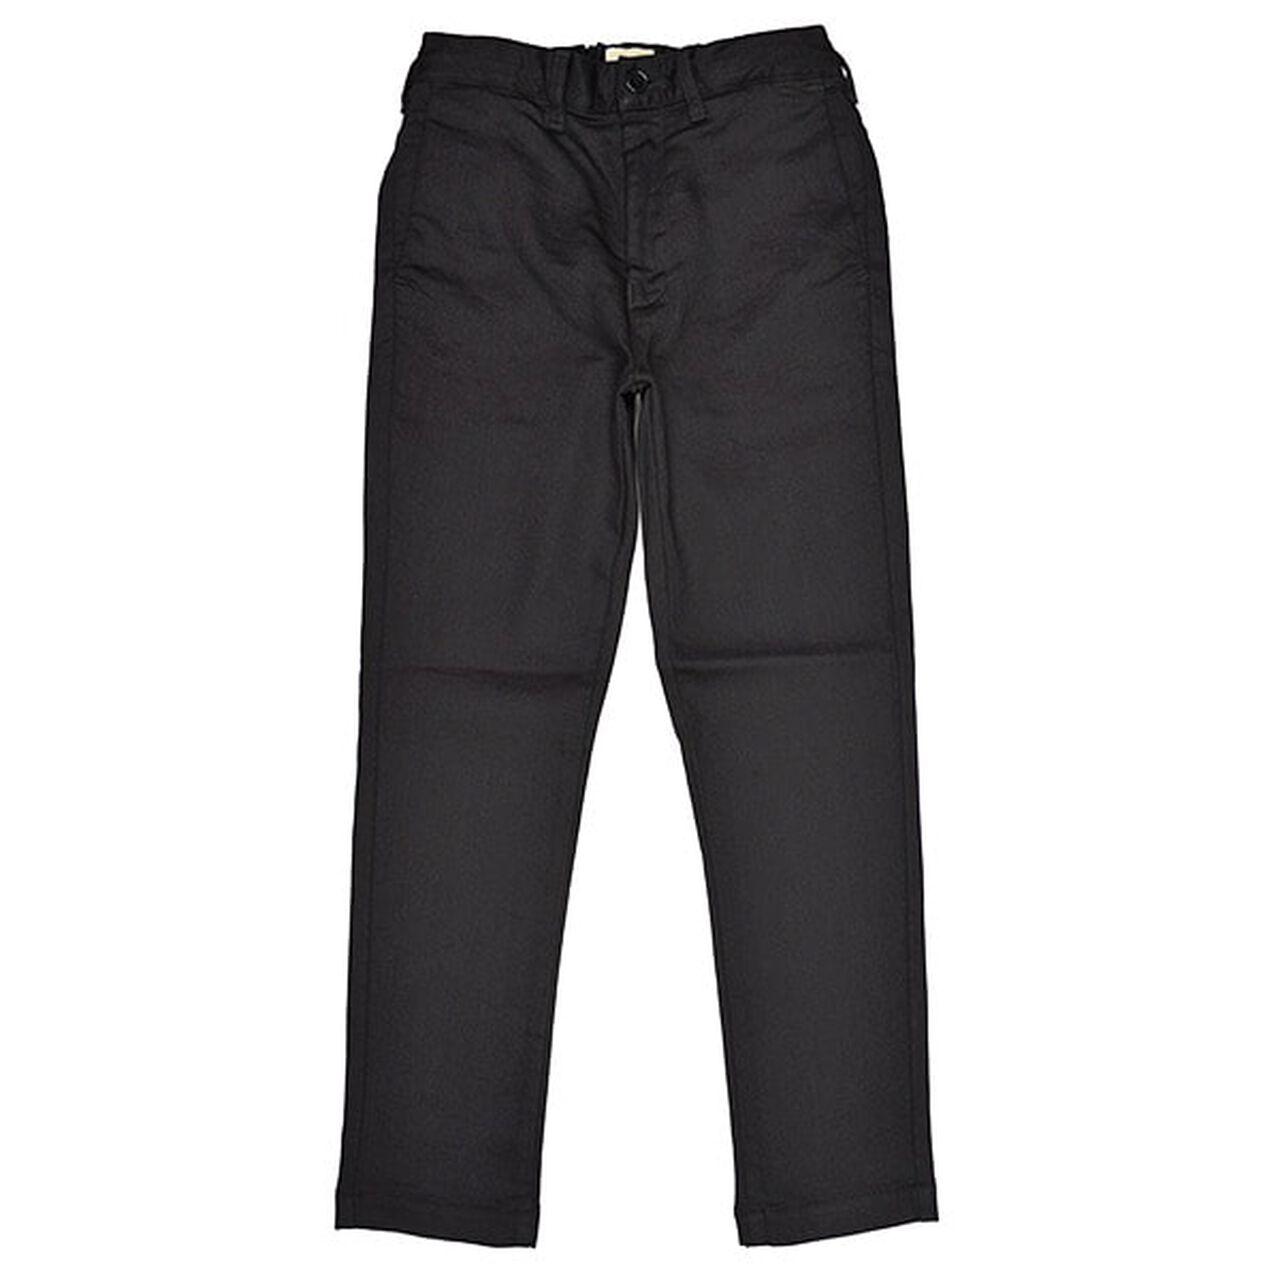 F0438 Relaxed Narrow Easy Pants,Black, large image number 0